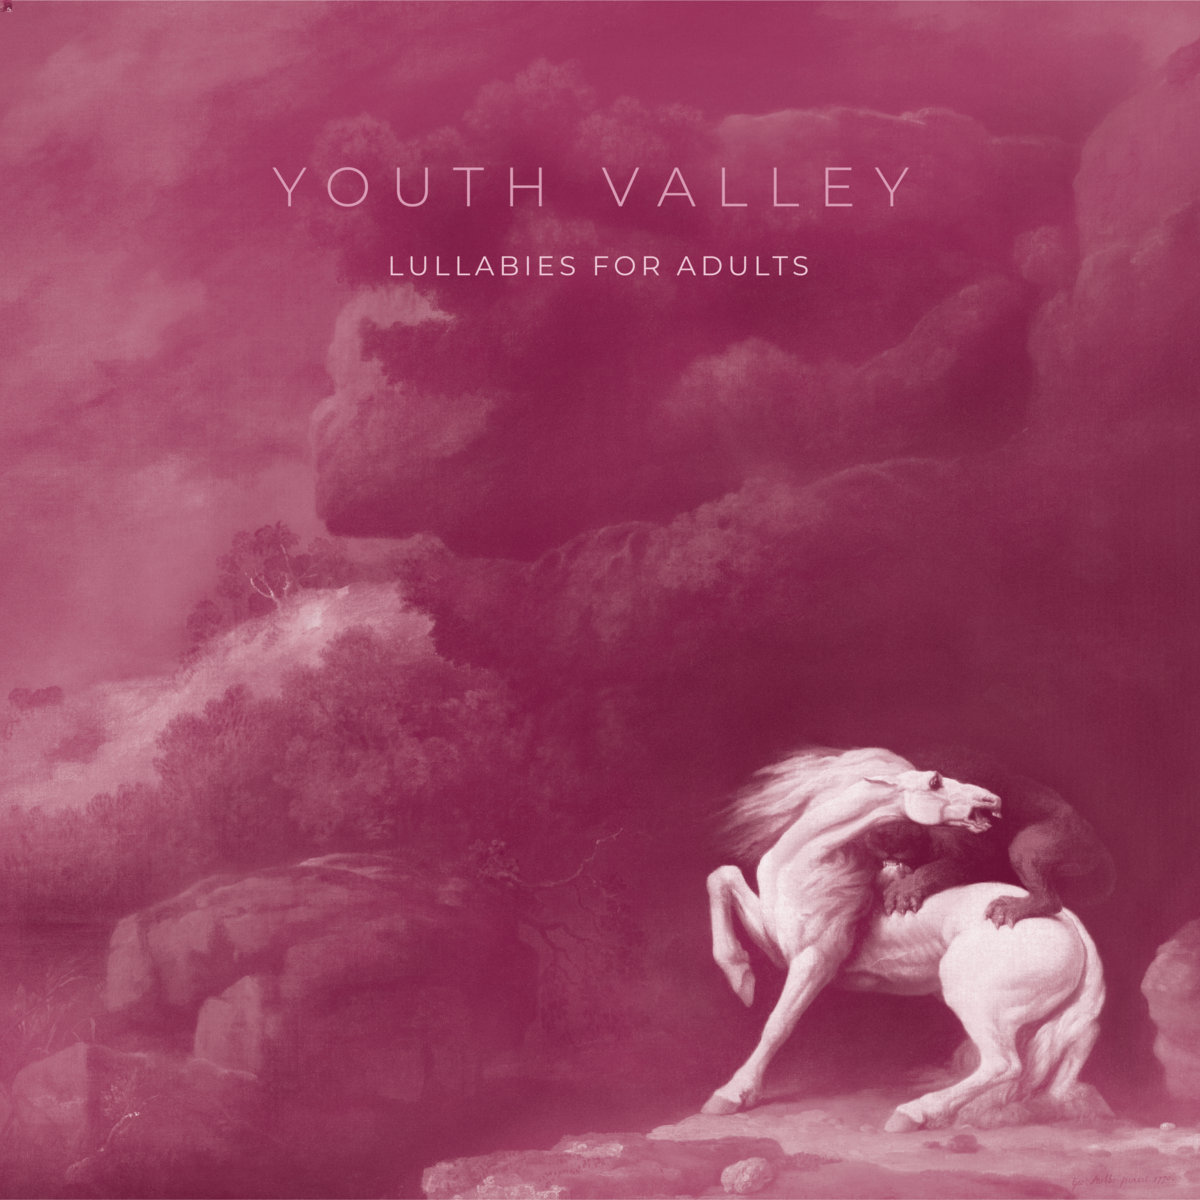 Single of the week – Youth Valley – Jean Moreas